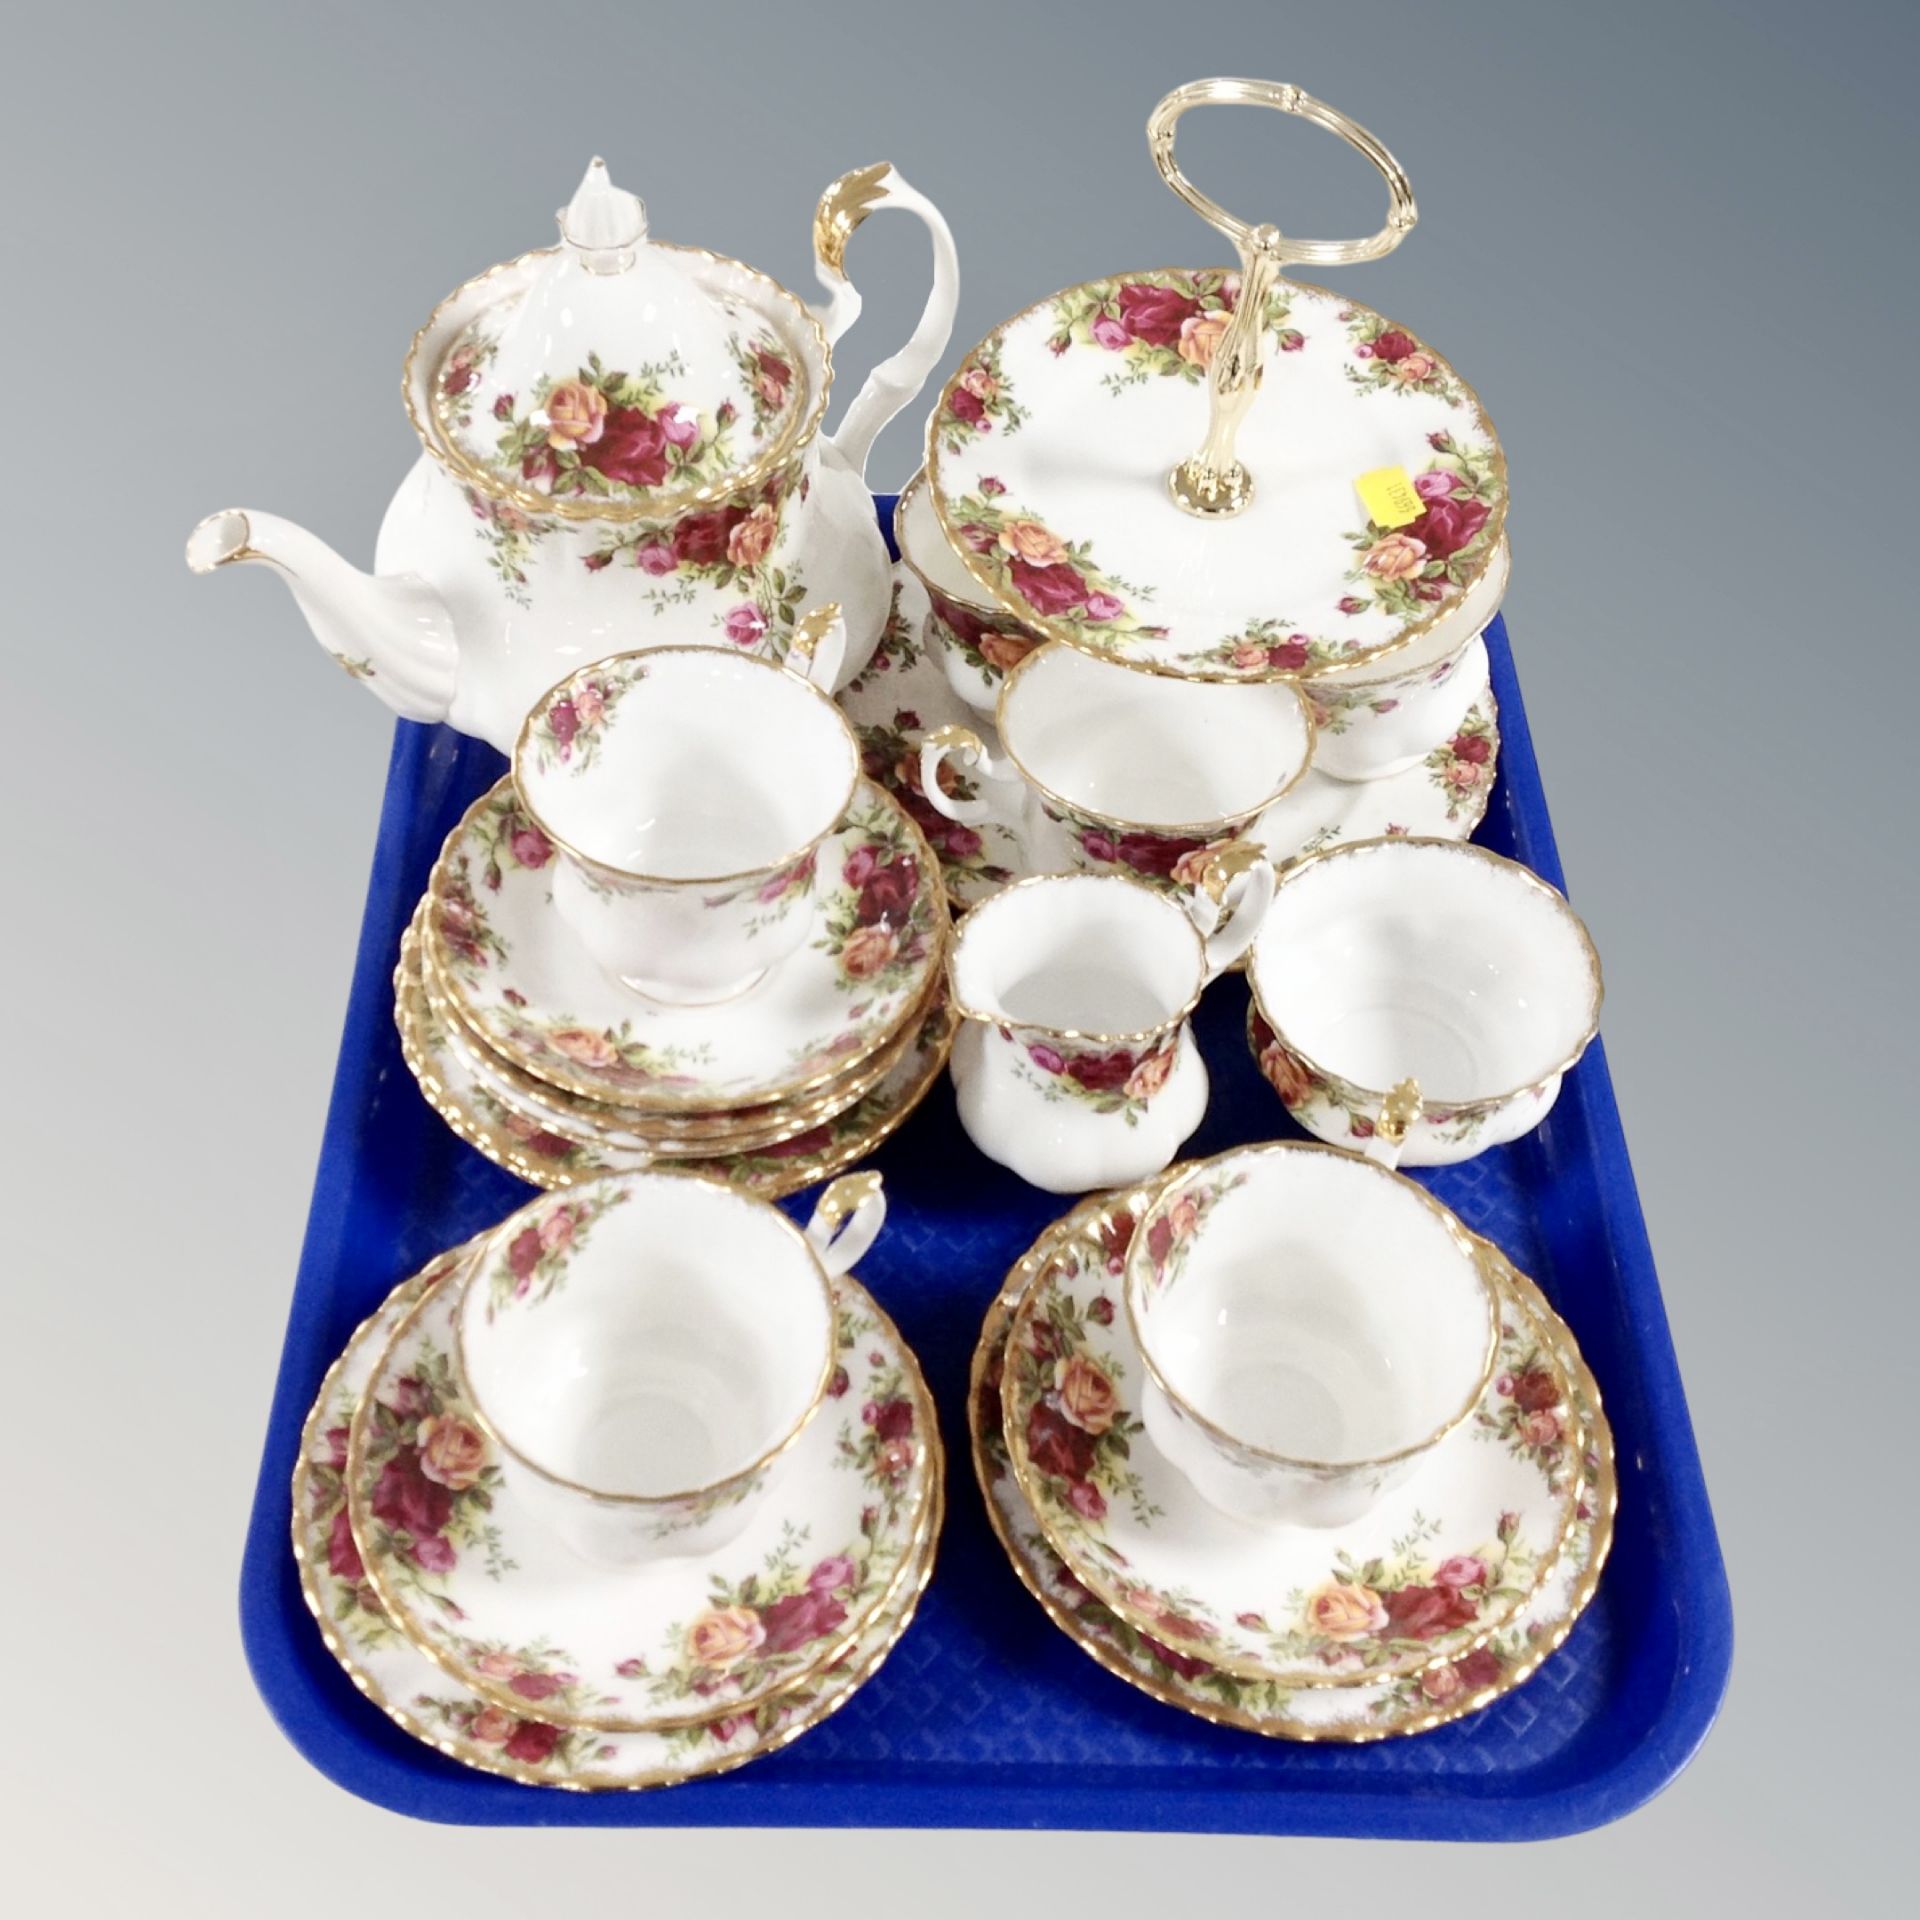 A tray of twenty-two pieces of Royal Albert Old Country Roses tea china (six place setting)